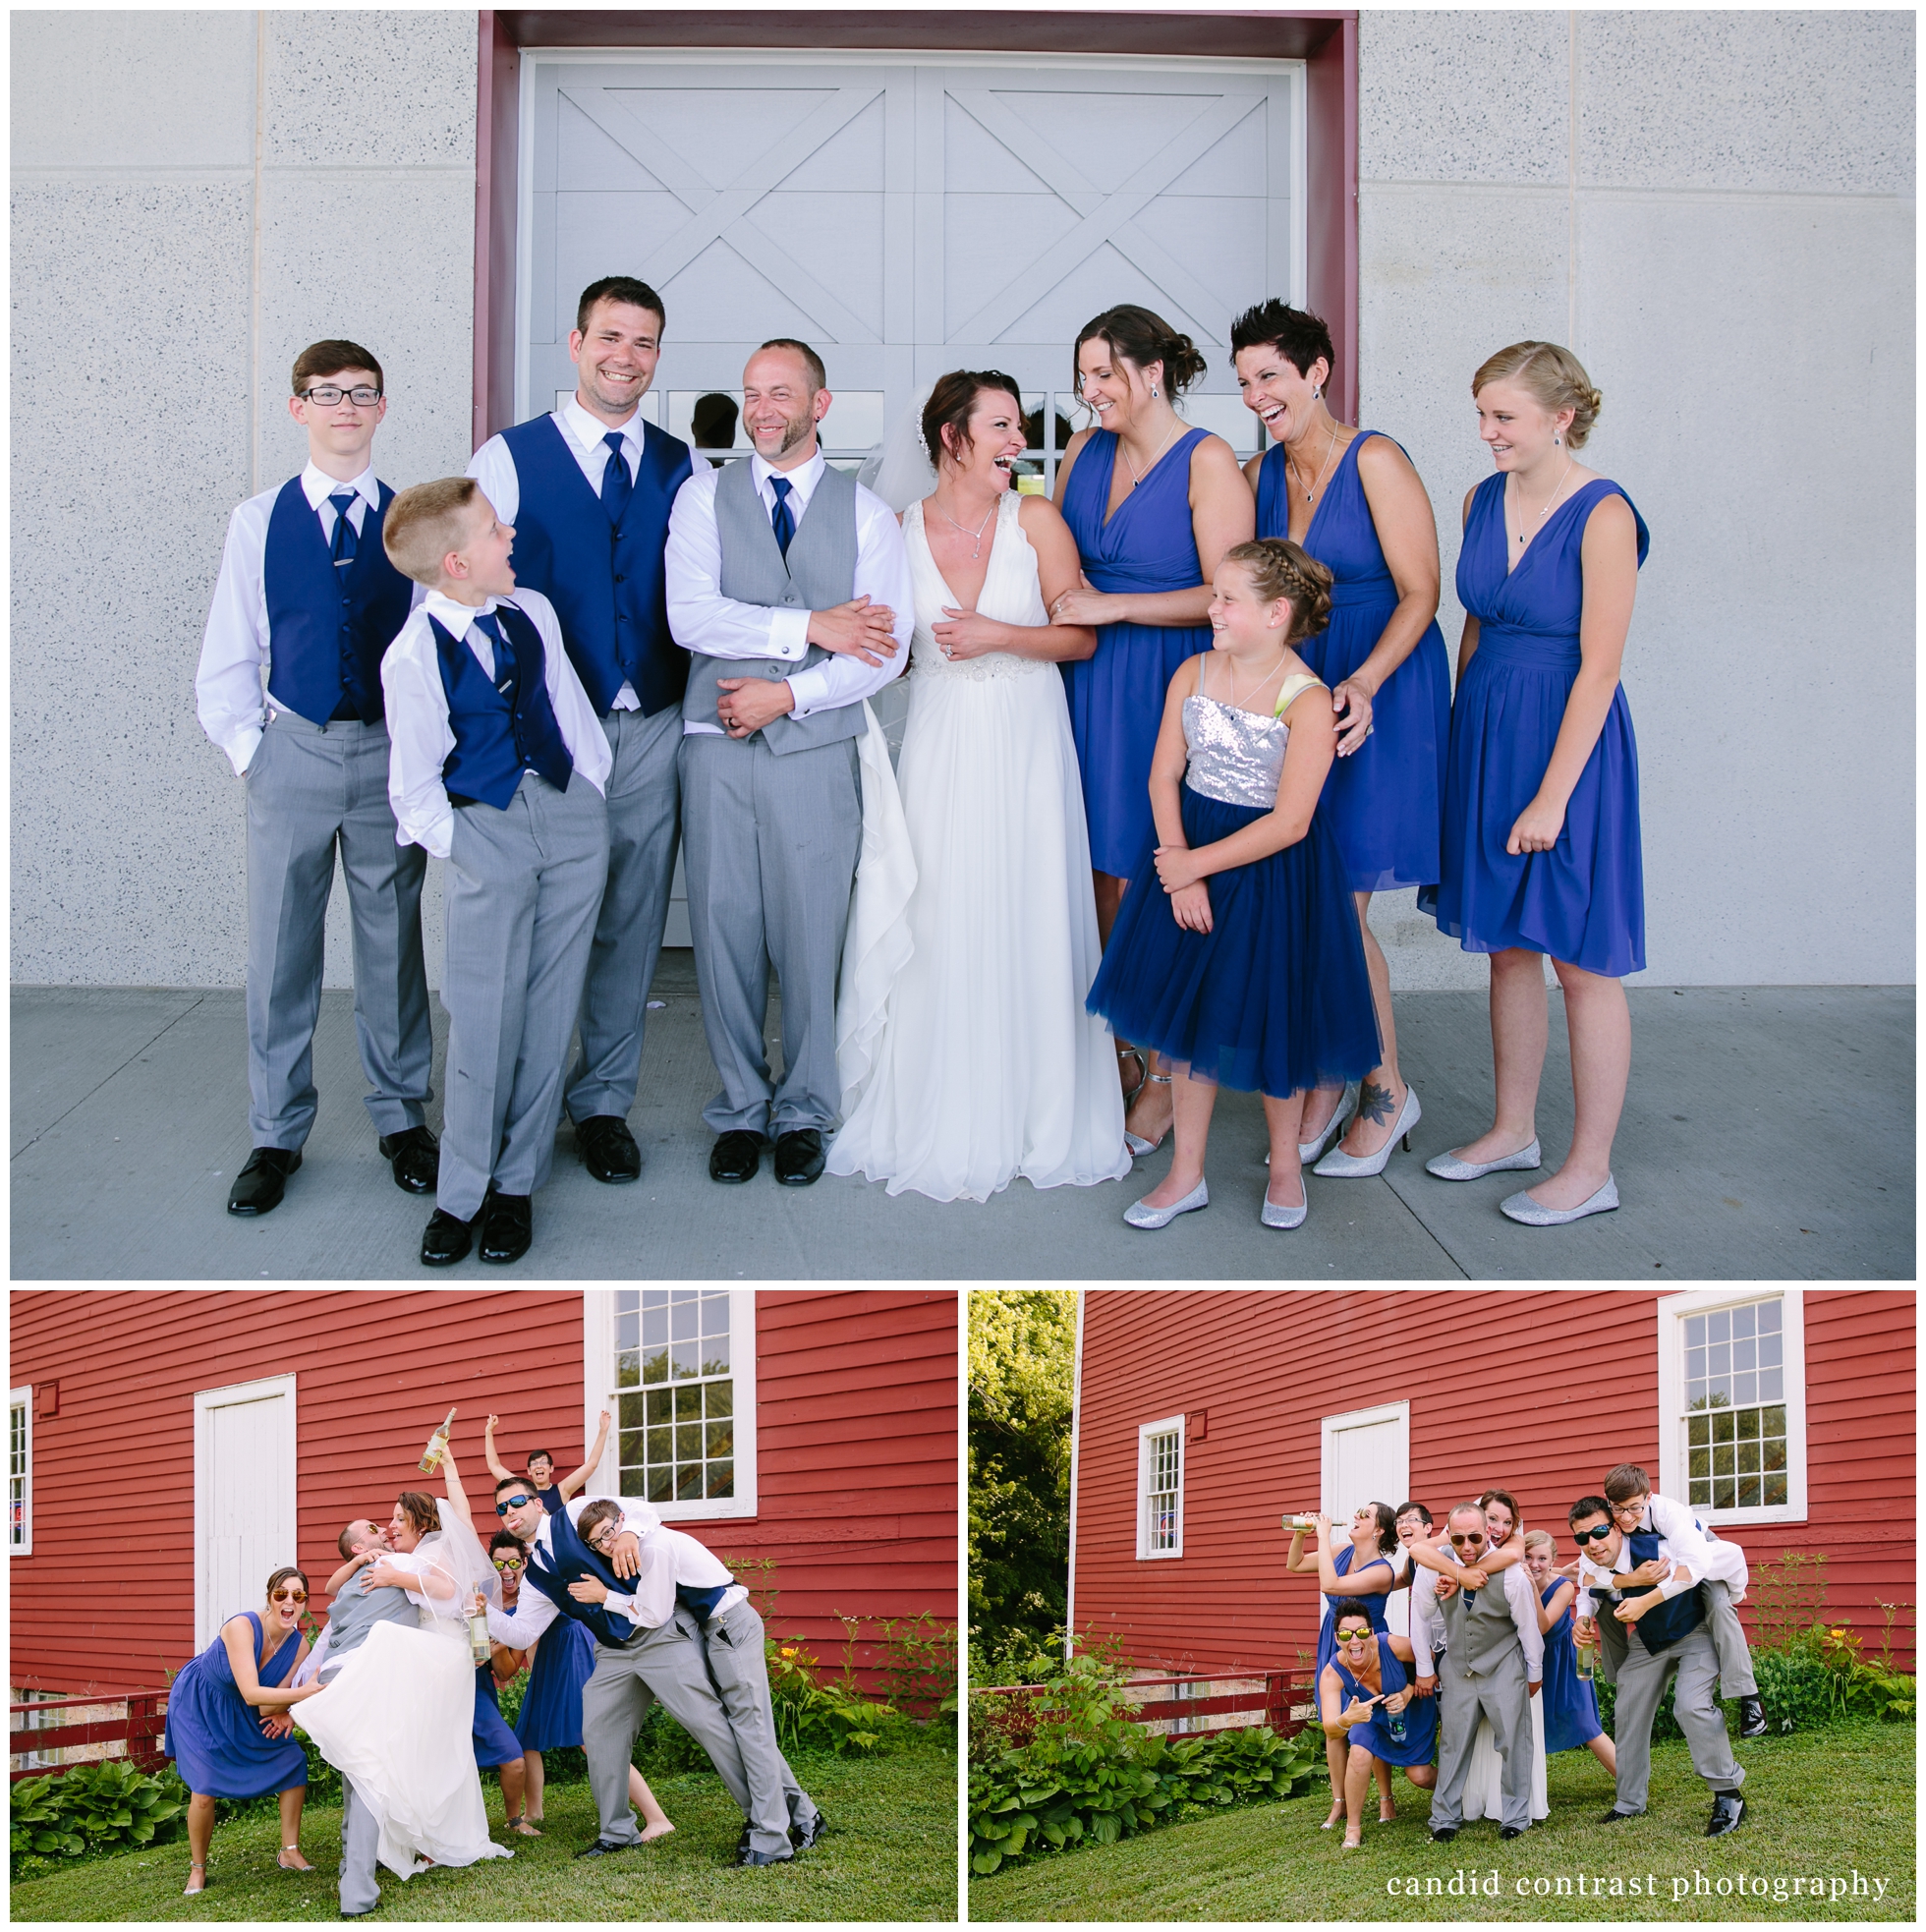 the wedding party at a bellevue iowa outdoor wedding at the shore event center, iowa wedding photographer candid contrast photography